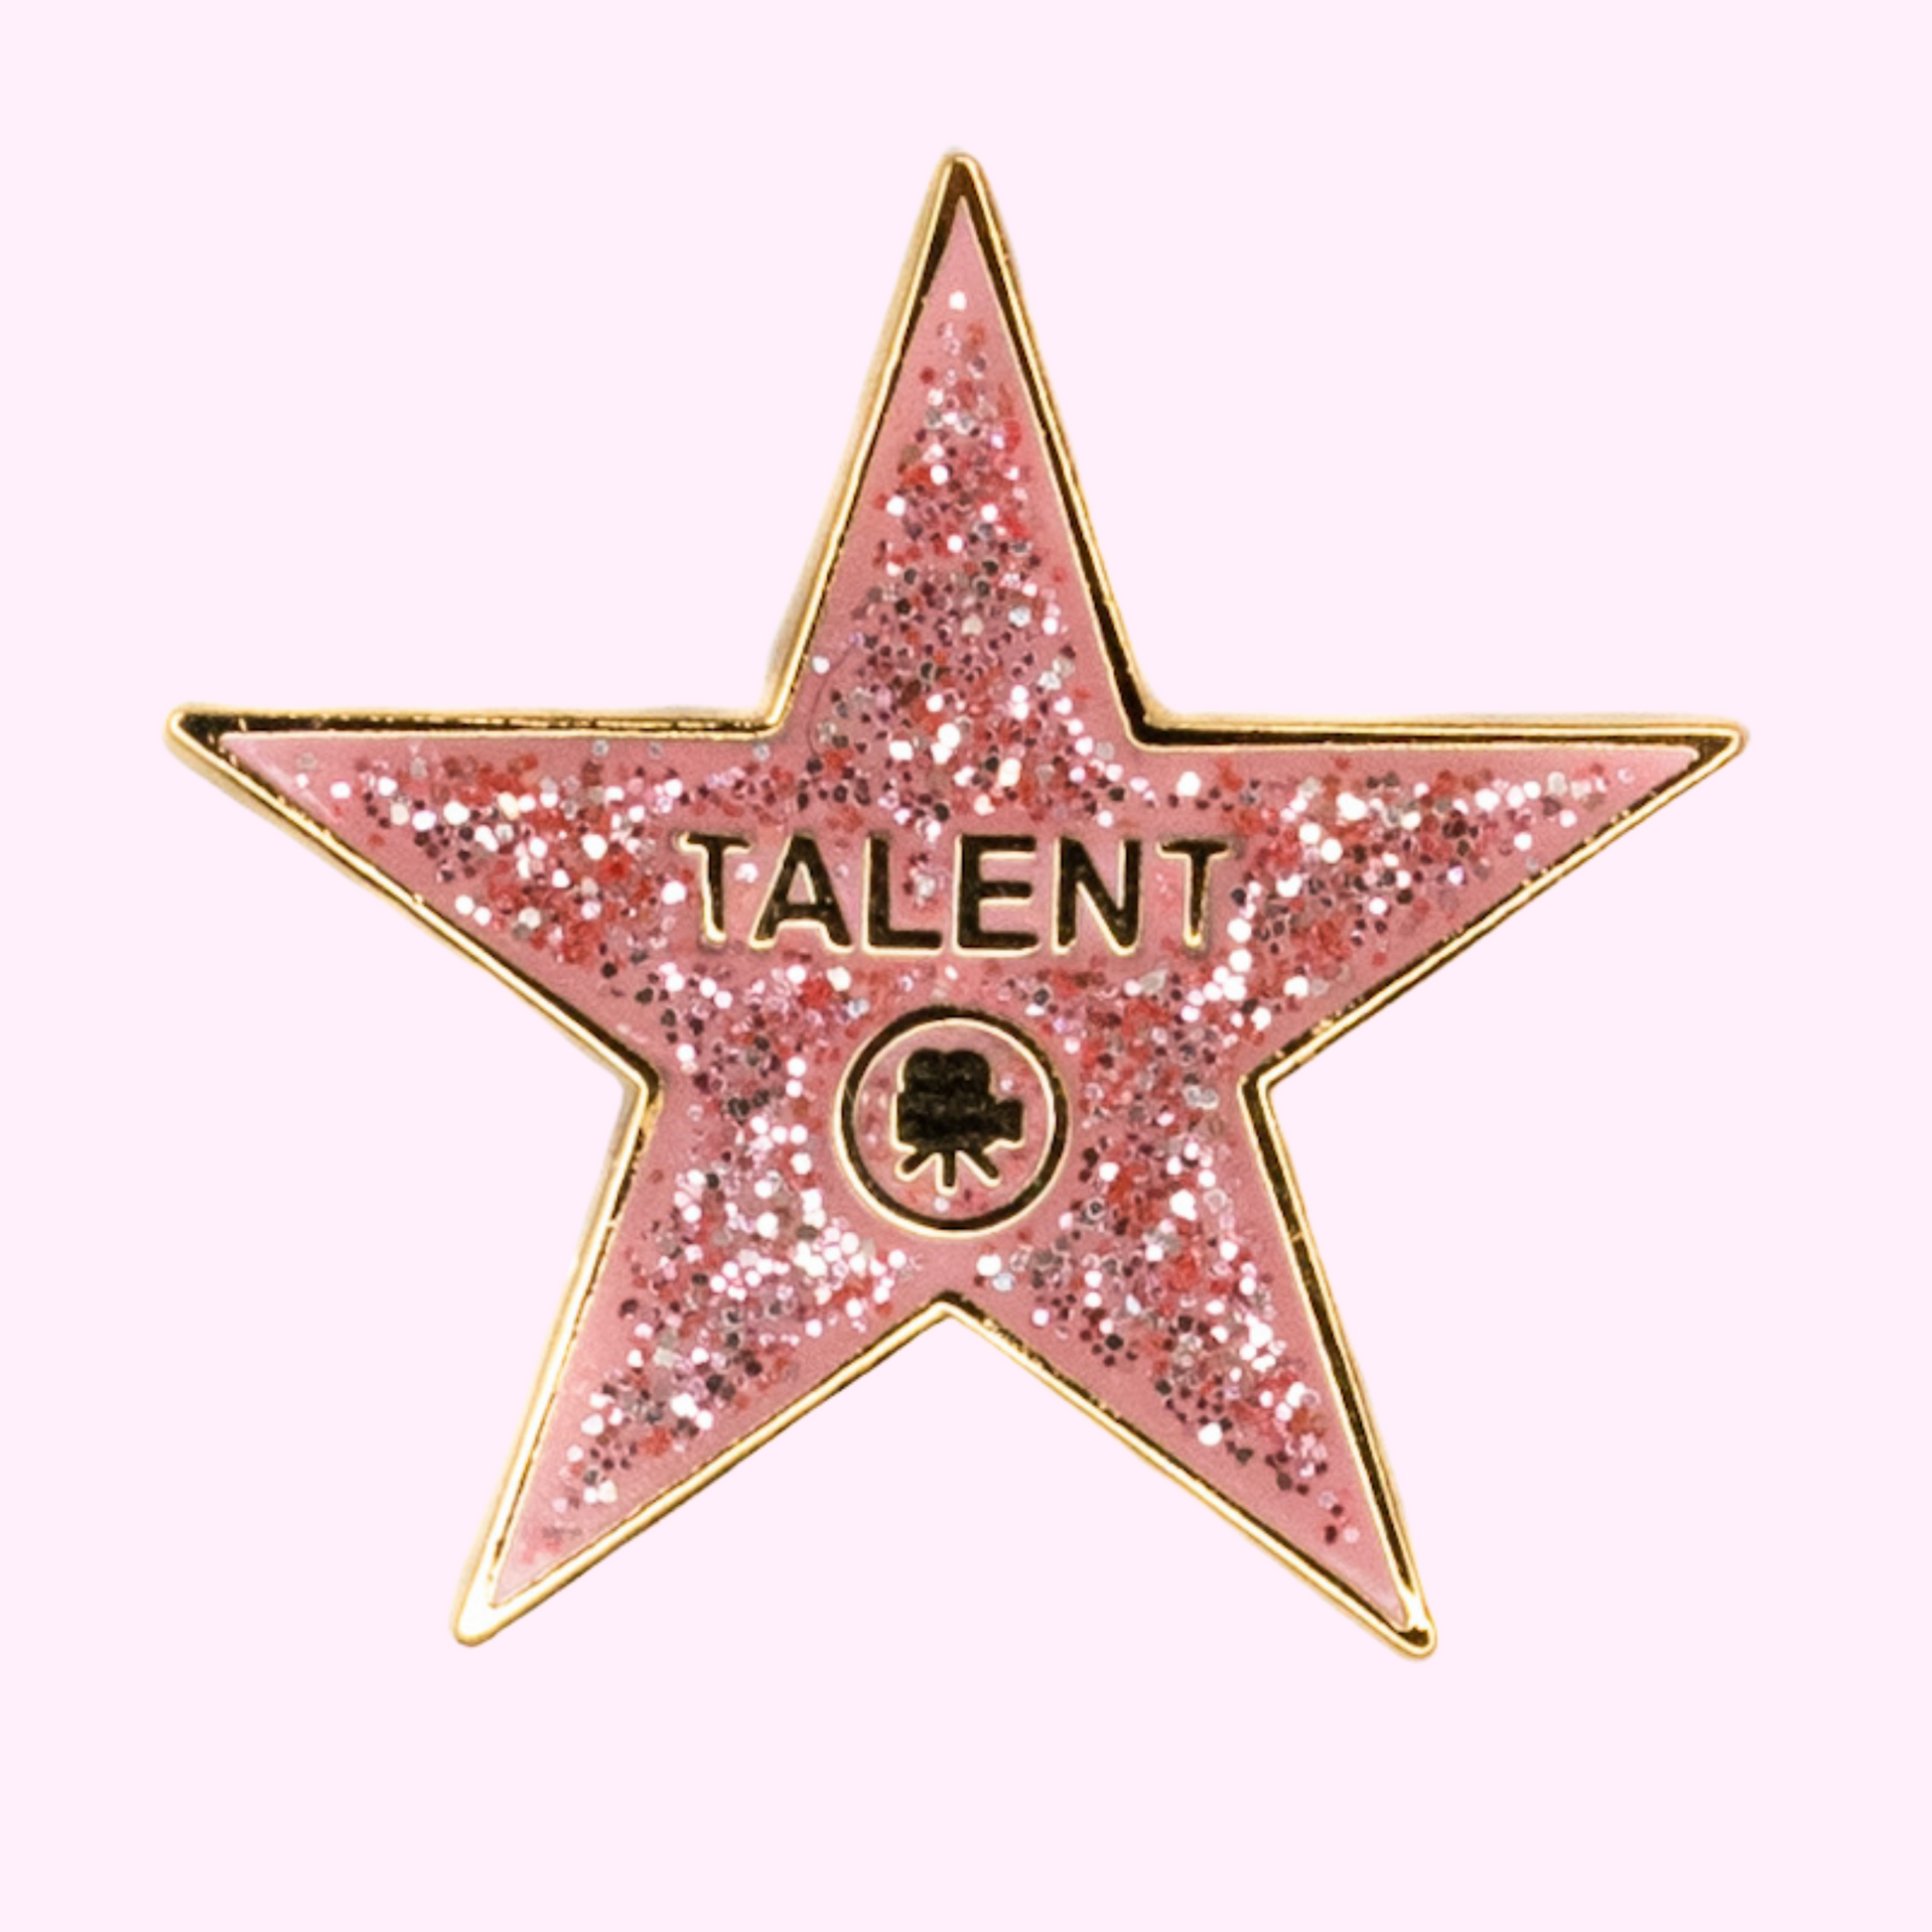 Pink glitter Hollywood star enamel pin with text 'Talent' - perfect accessory for aspiring actors, film enthusiasts and fashion lovers, high-quality and durable, stylish and sparkling design